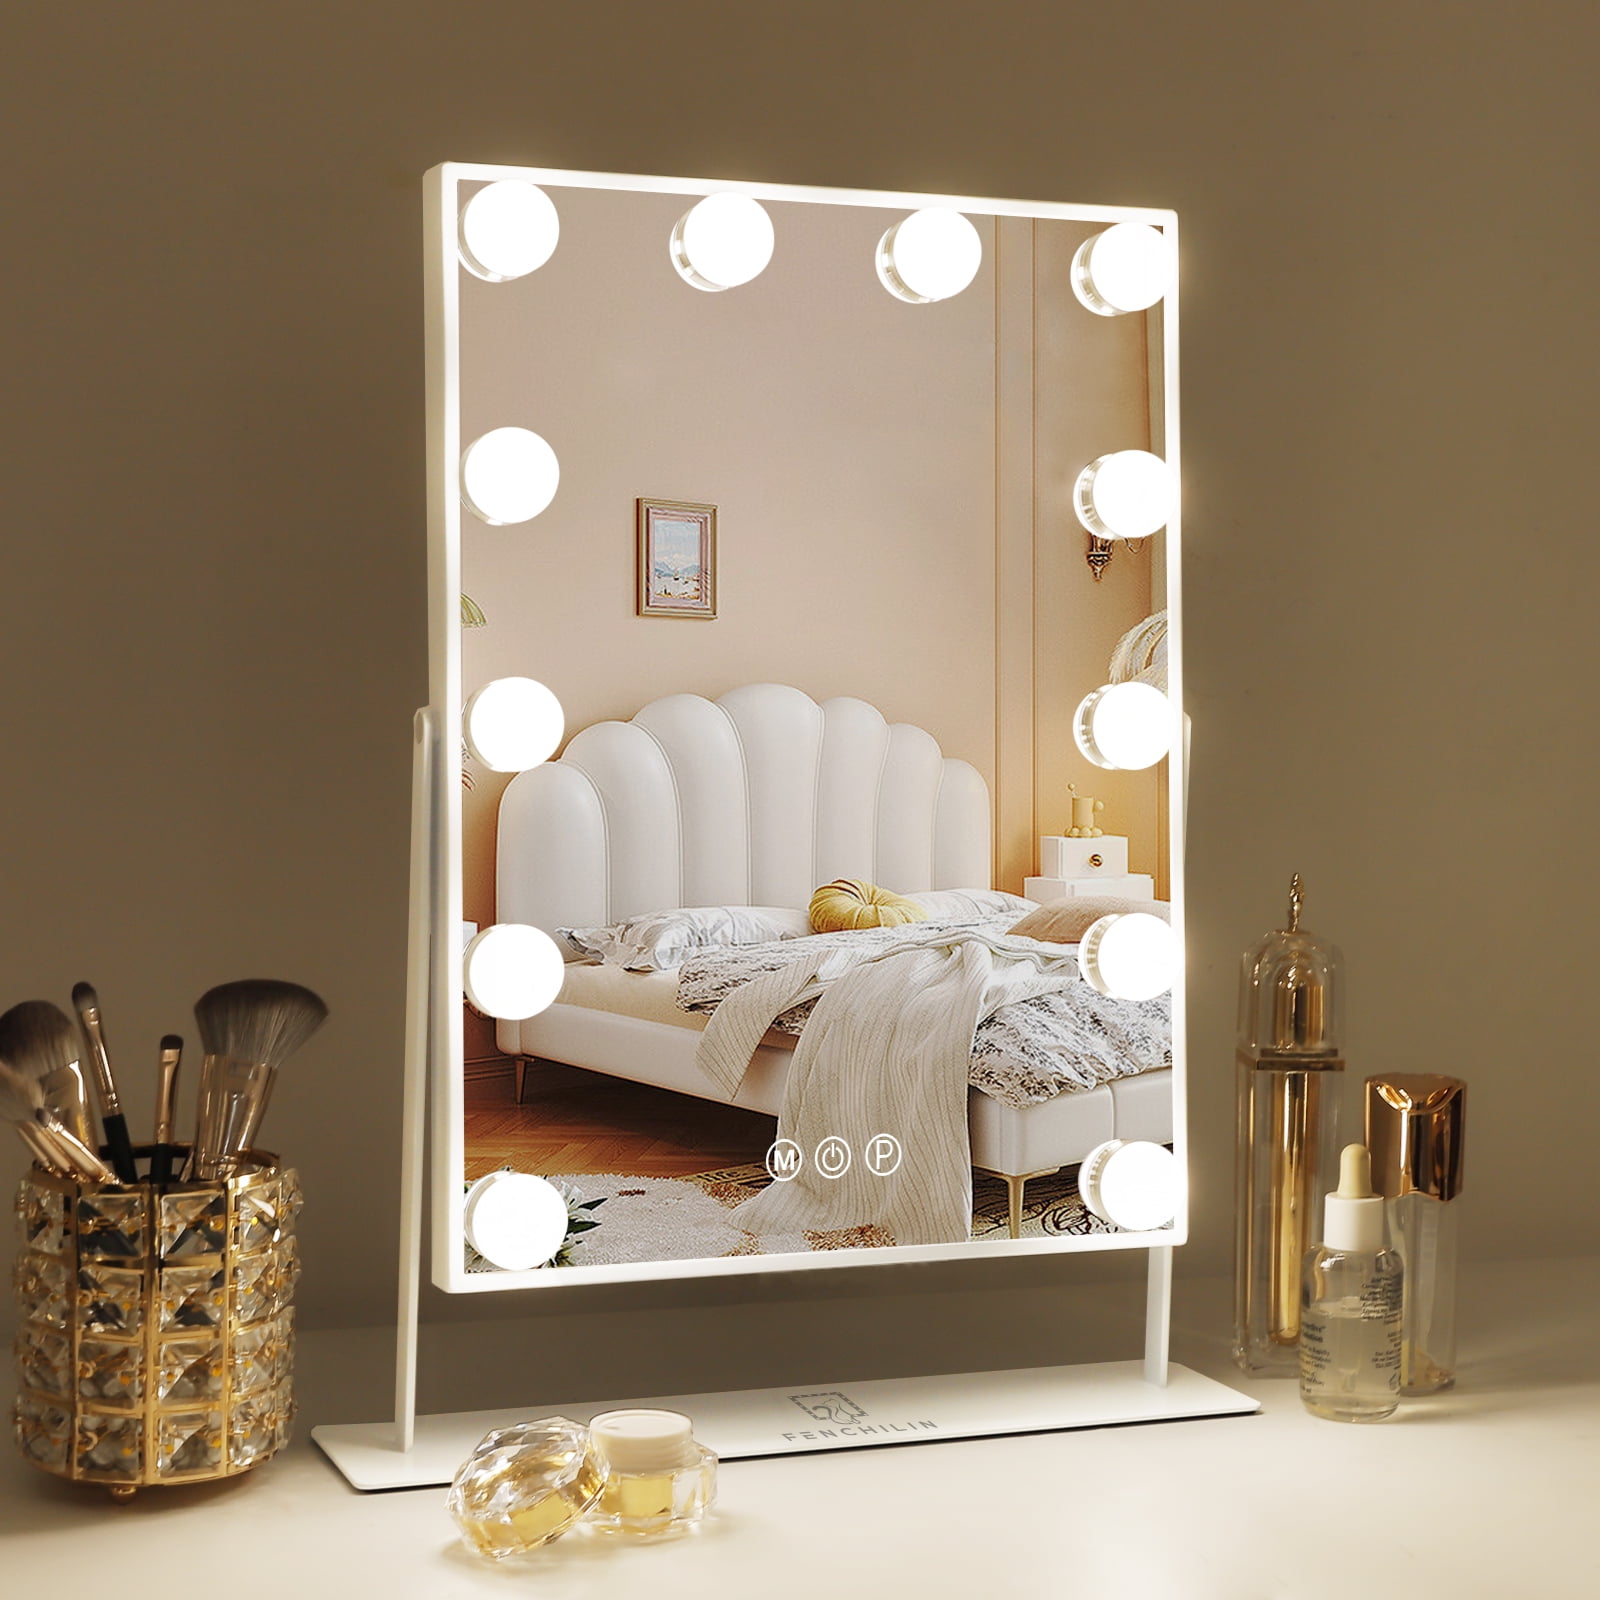 SHOWTIMEZ Vanity Mirror Makeup Mirror with Lights, Hollywood Vanity Makeup  Mirror with LED Lights for Dressing Room & Bedroom, W22.8xH17.5in.